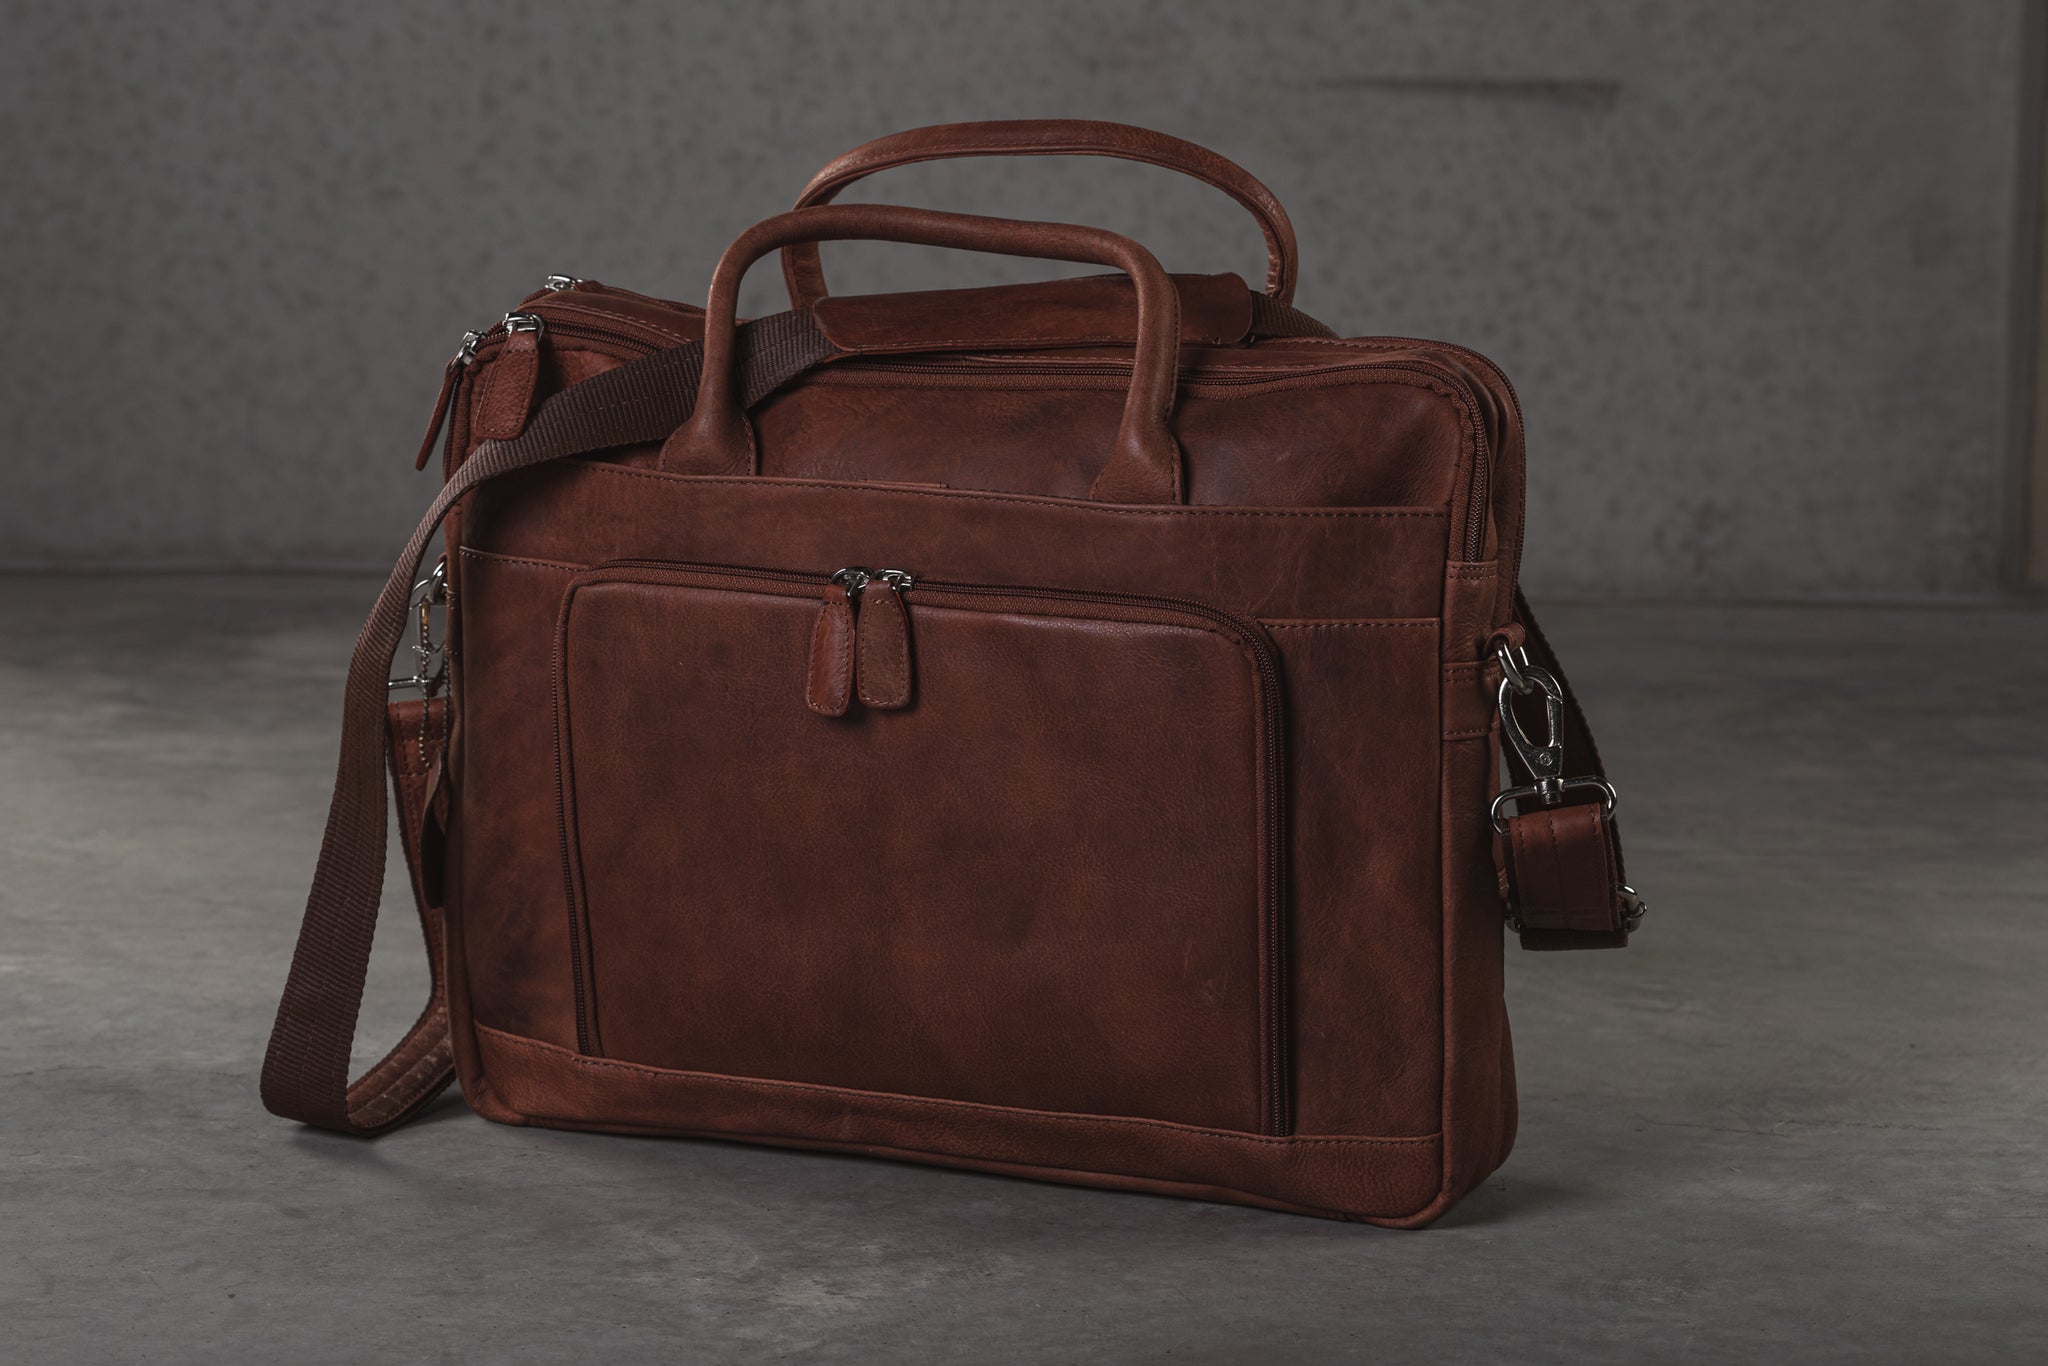 Our Guide on Shopping for the Best Large Laptop Bag In 2023